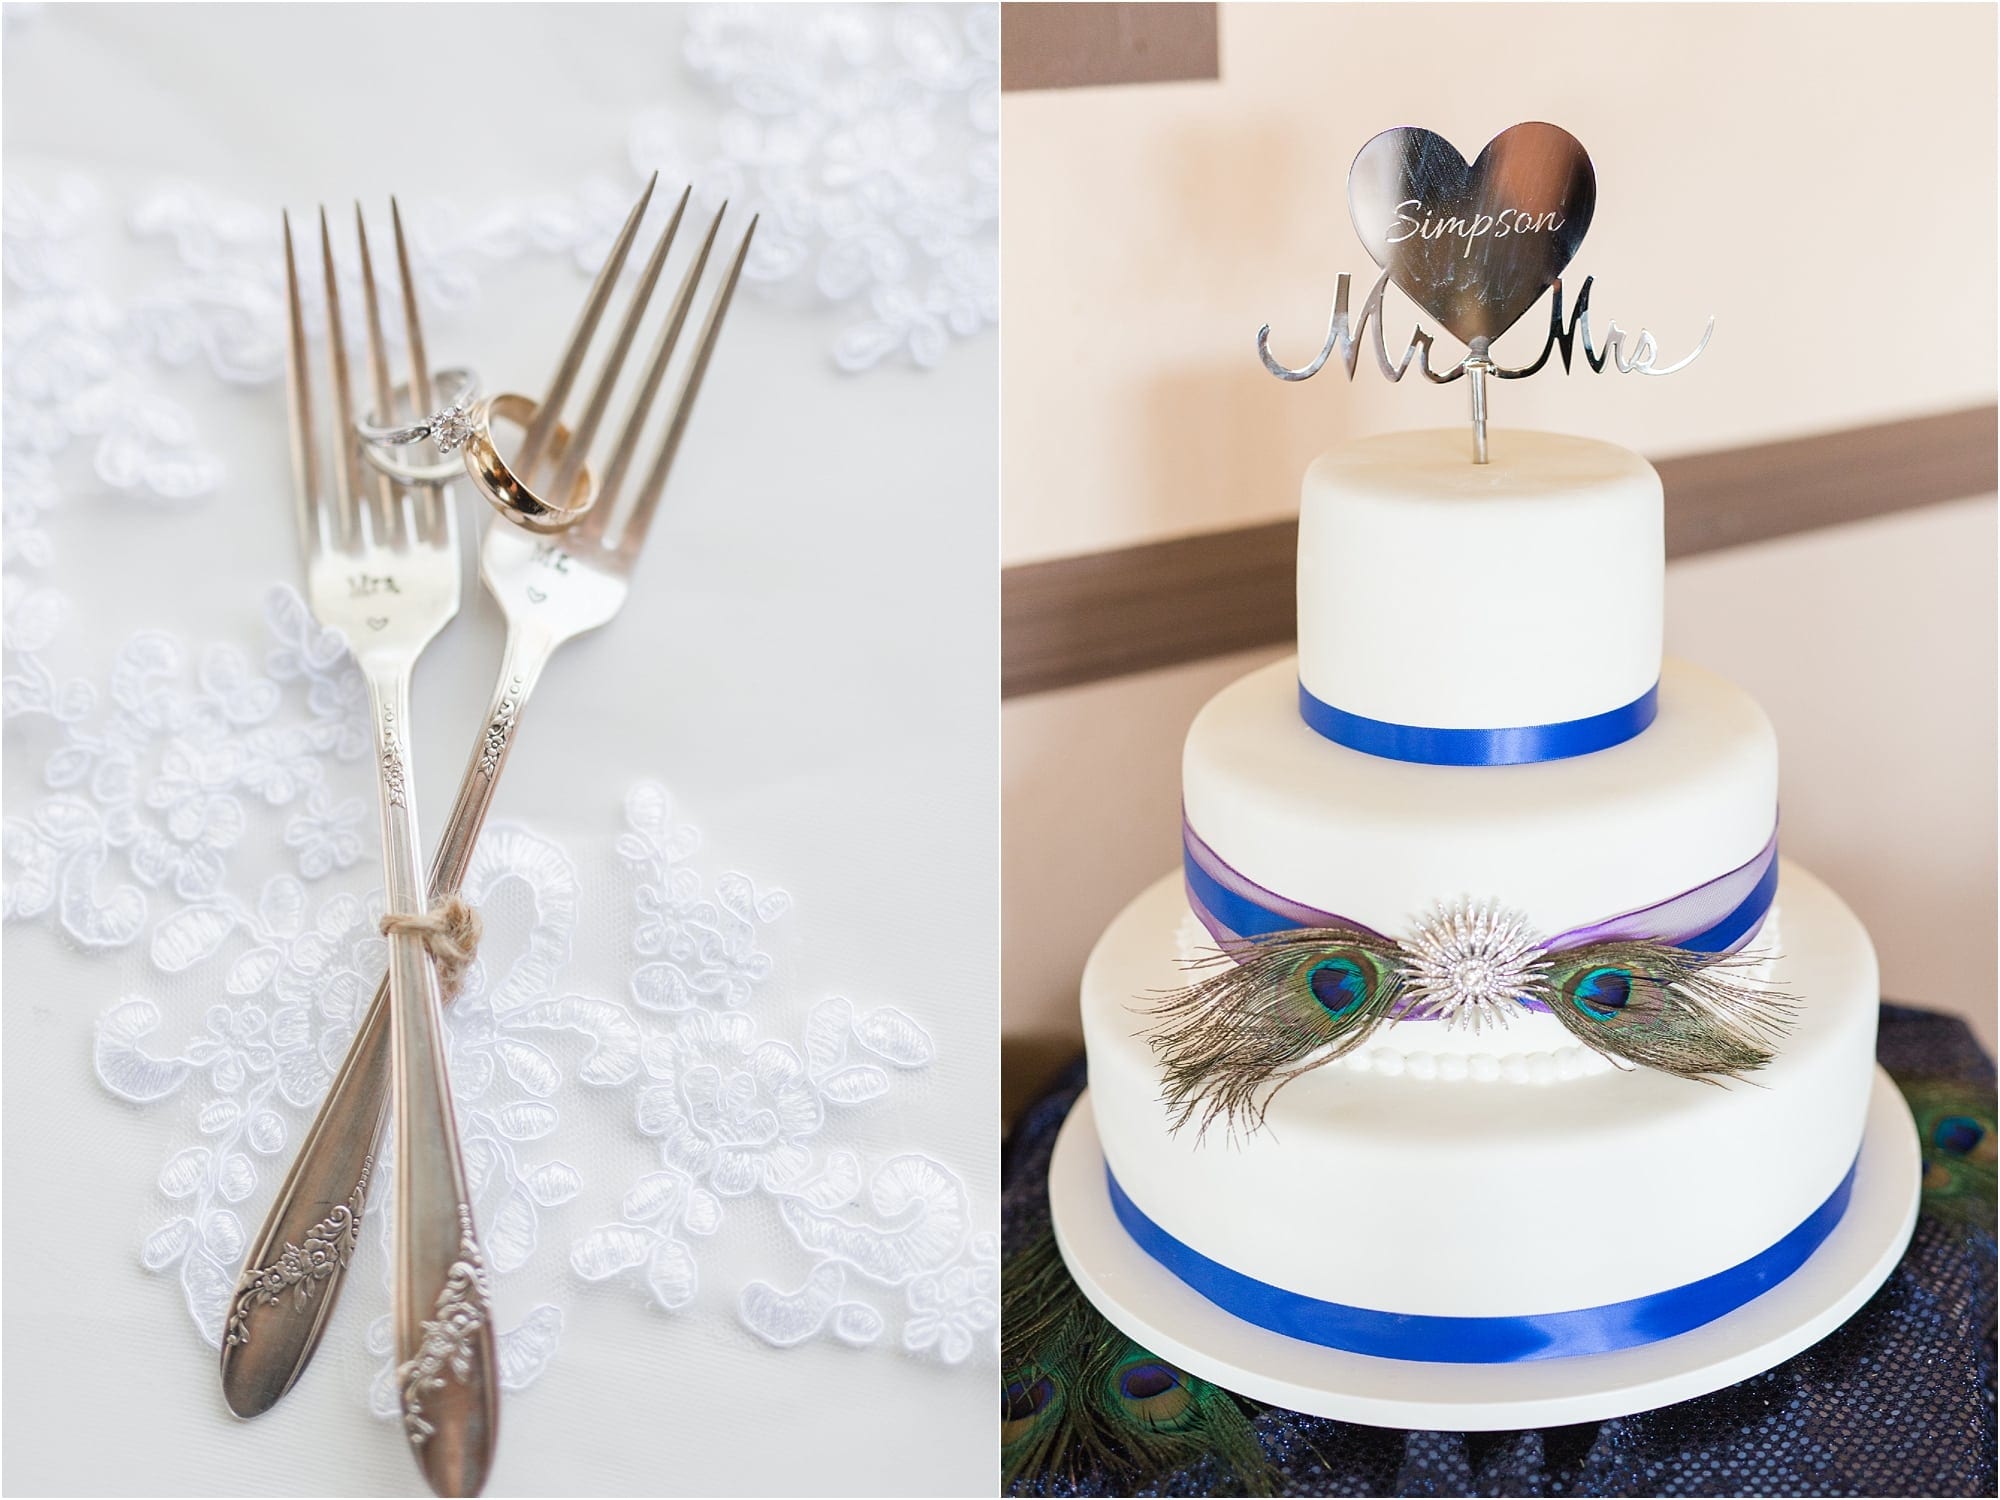 Cake, personalized forks, wedding rings